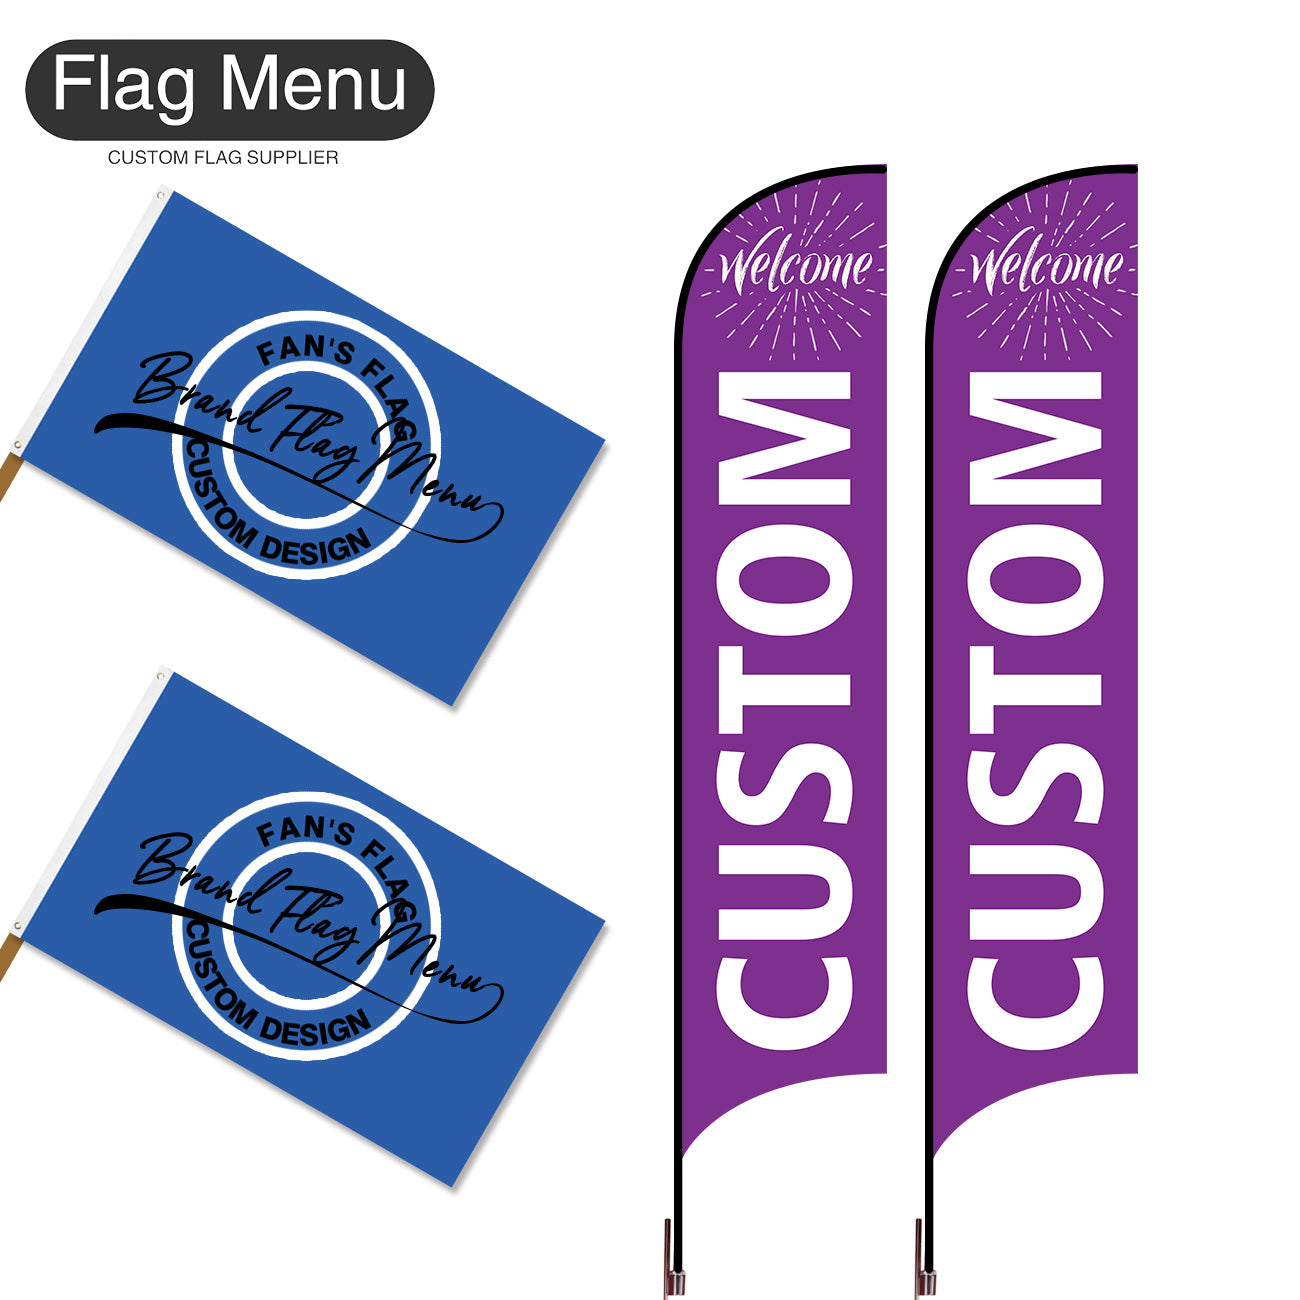 Outdoor Advertising Set - C-Purple B-S - Feather Flag -Double Sided & 3'x5' Regular Flag -Single Sided-Cross & Water Bag-Flag Menu